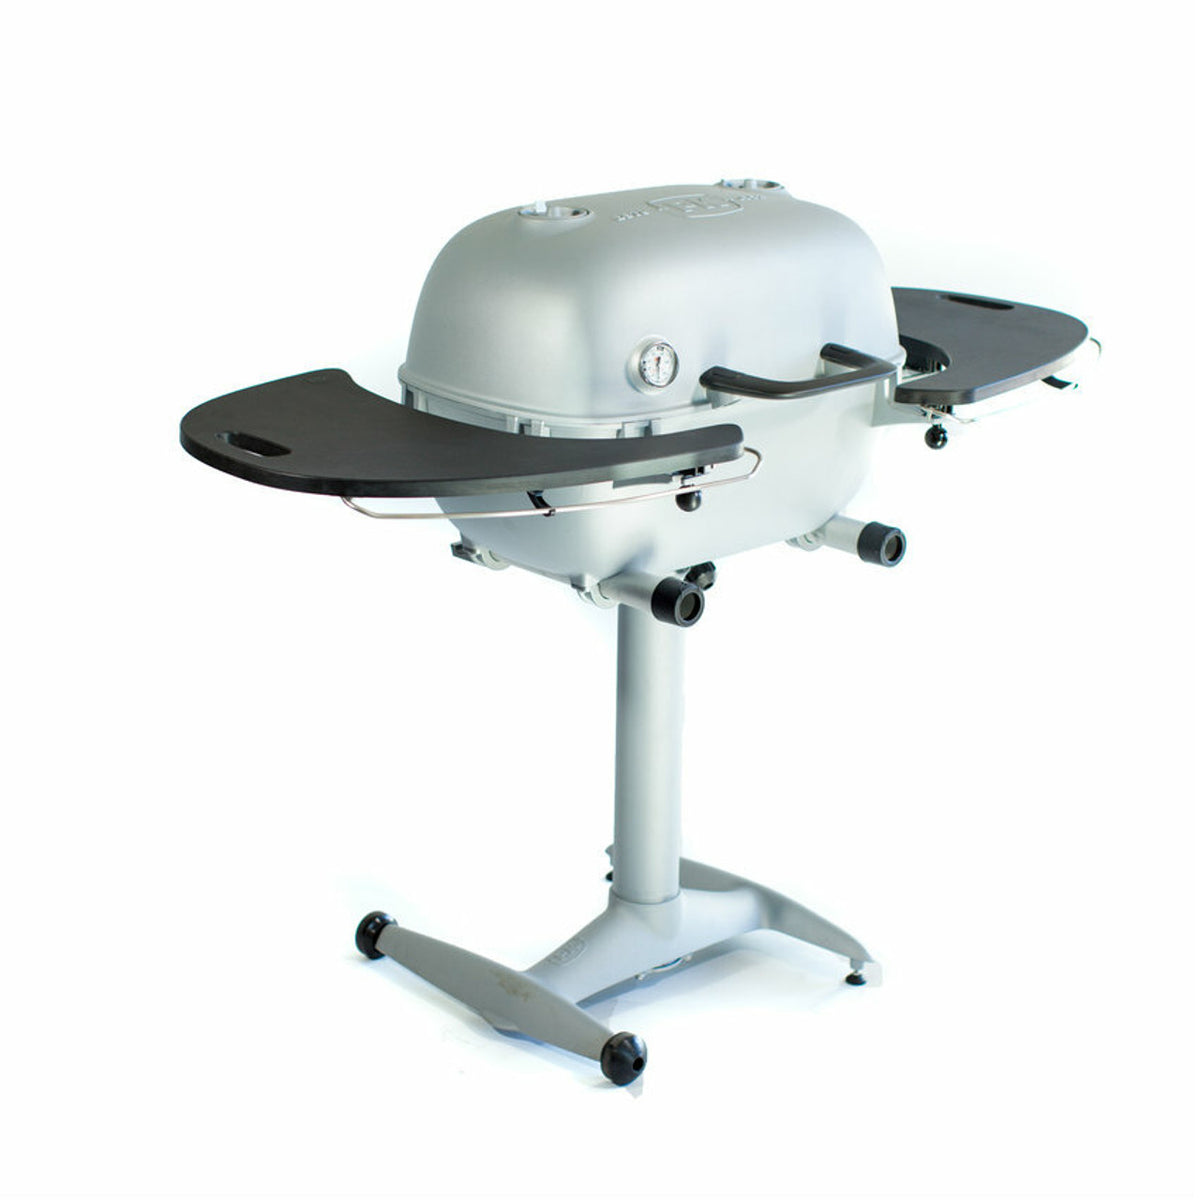 PK Grills PK360 Grill and Smoker